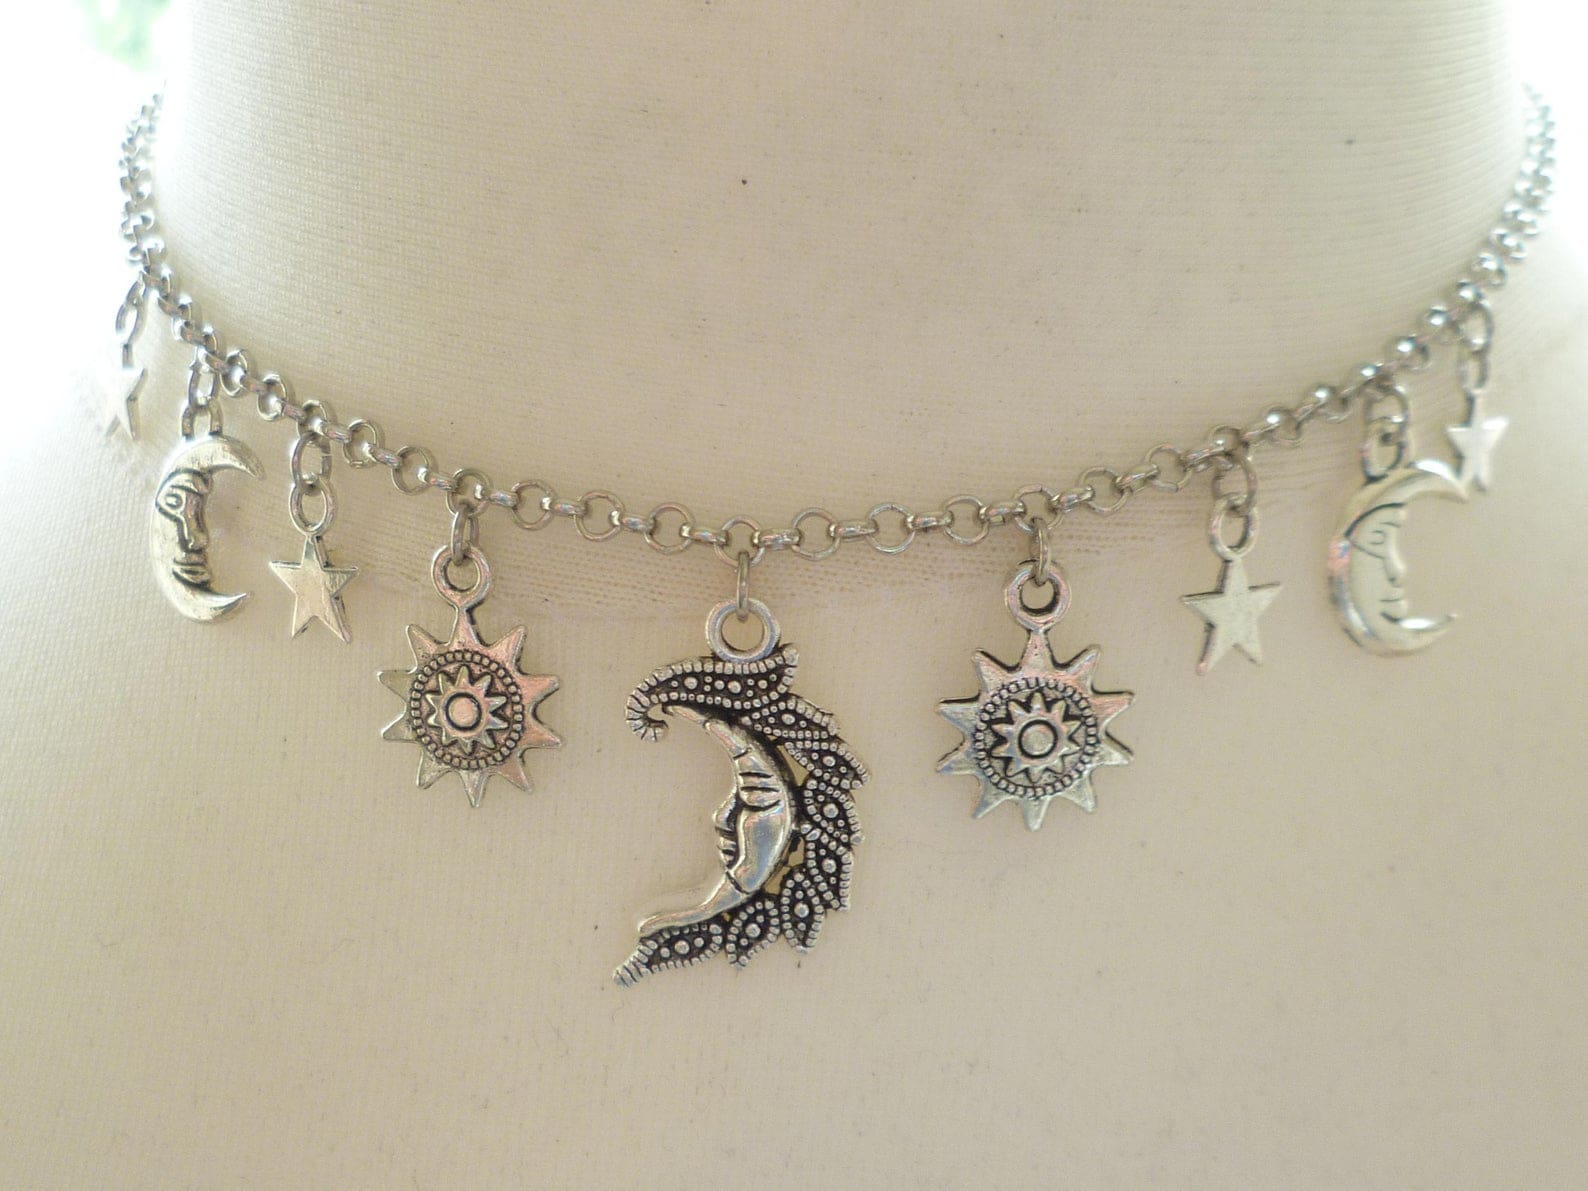 90s grunge tattoo choker and necklace with dragonfly charm…